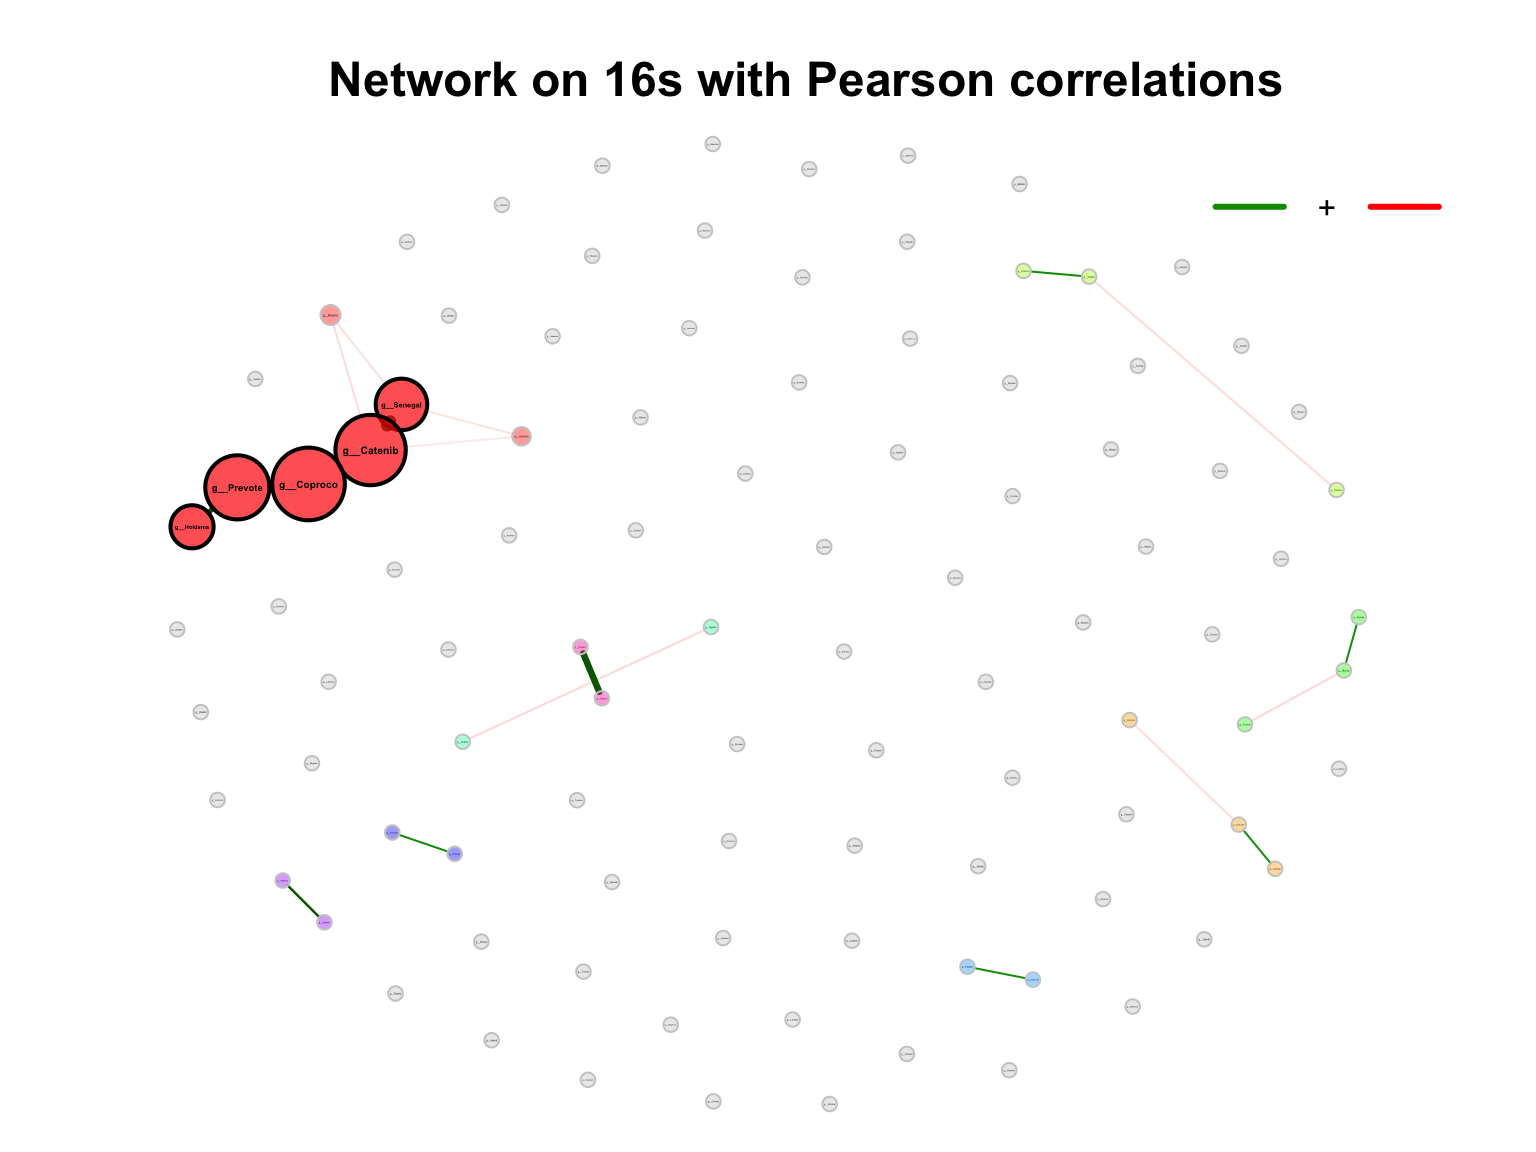 Network on 16s with Pearson correlations